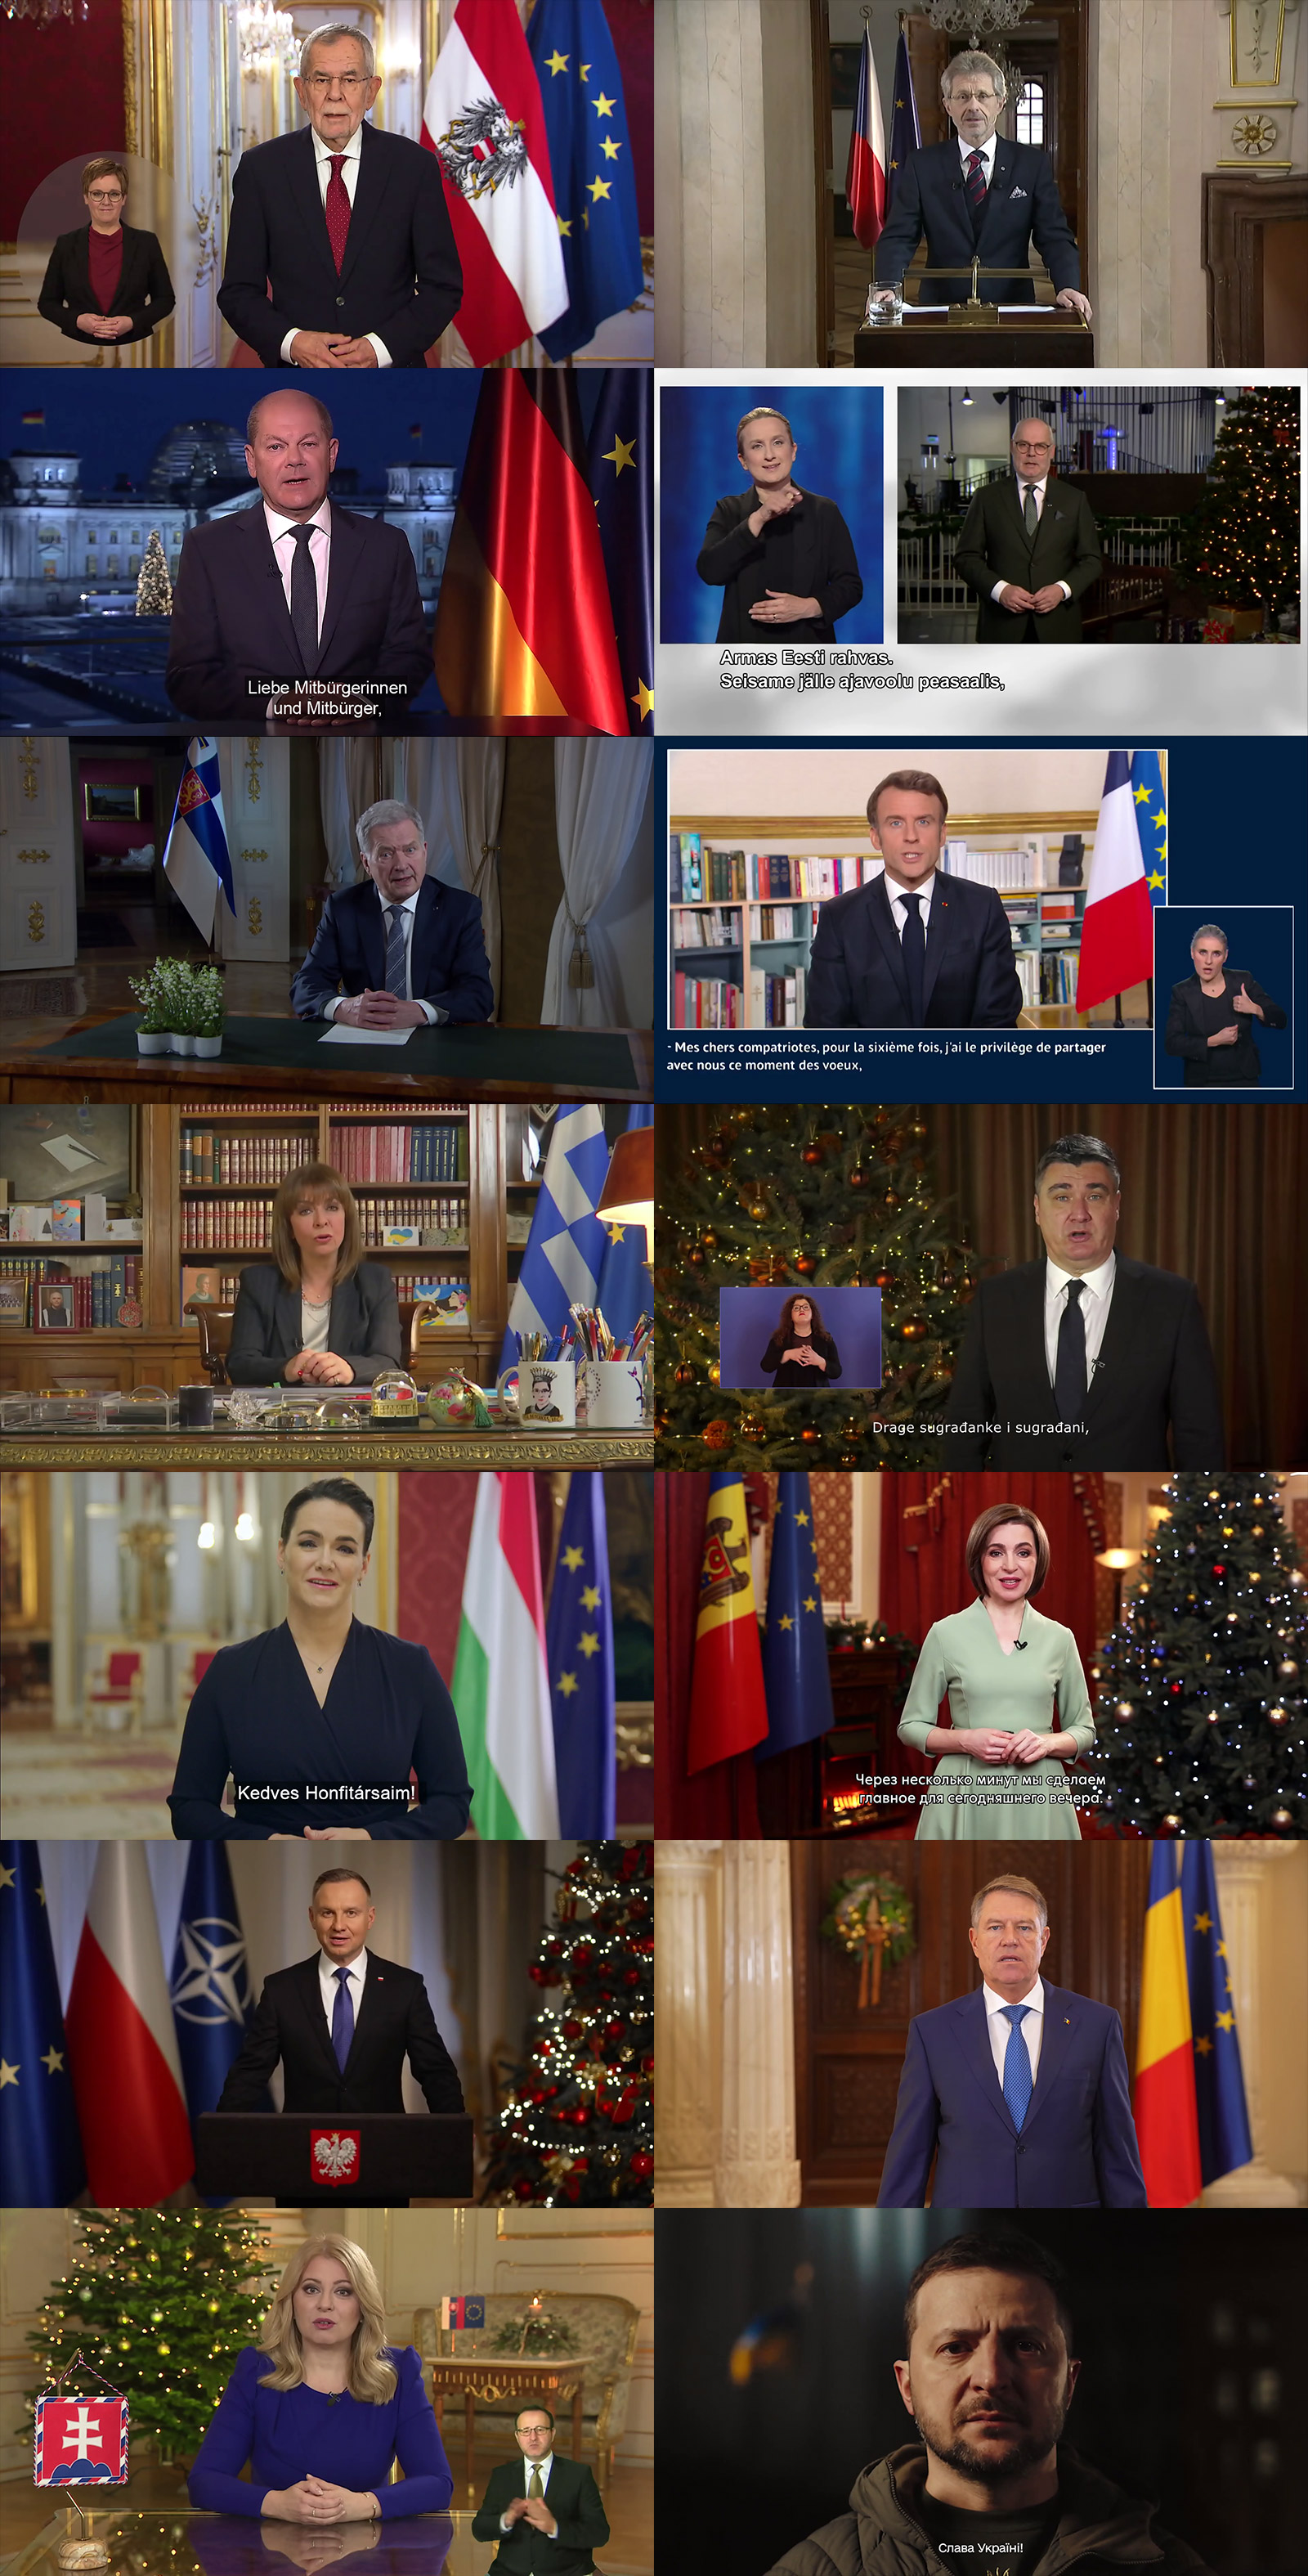 2023’s New Year’s Eve TV address in some European countries